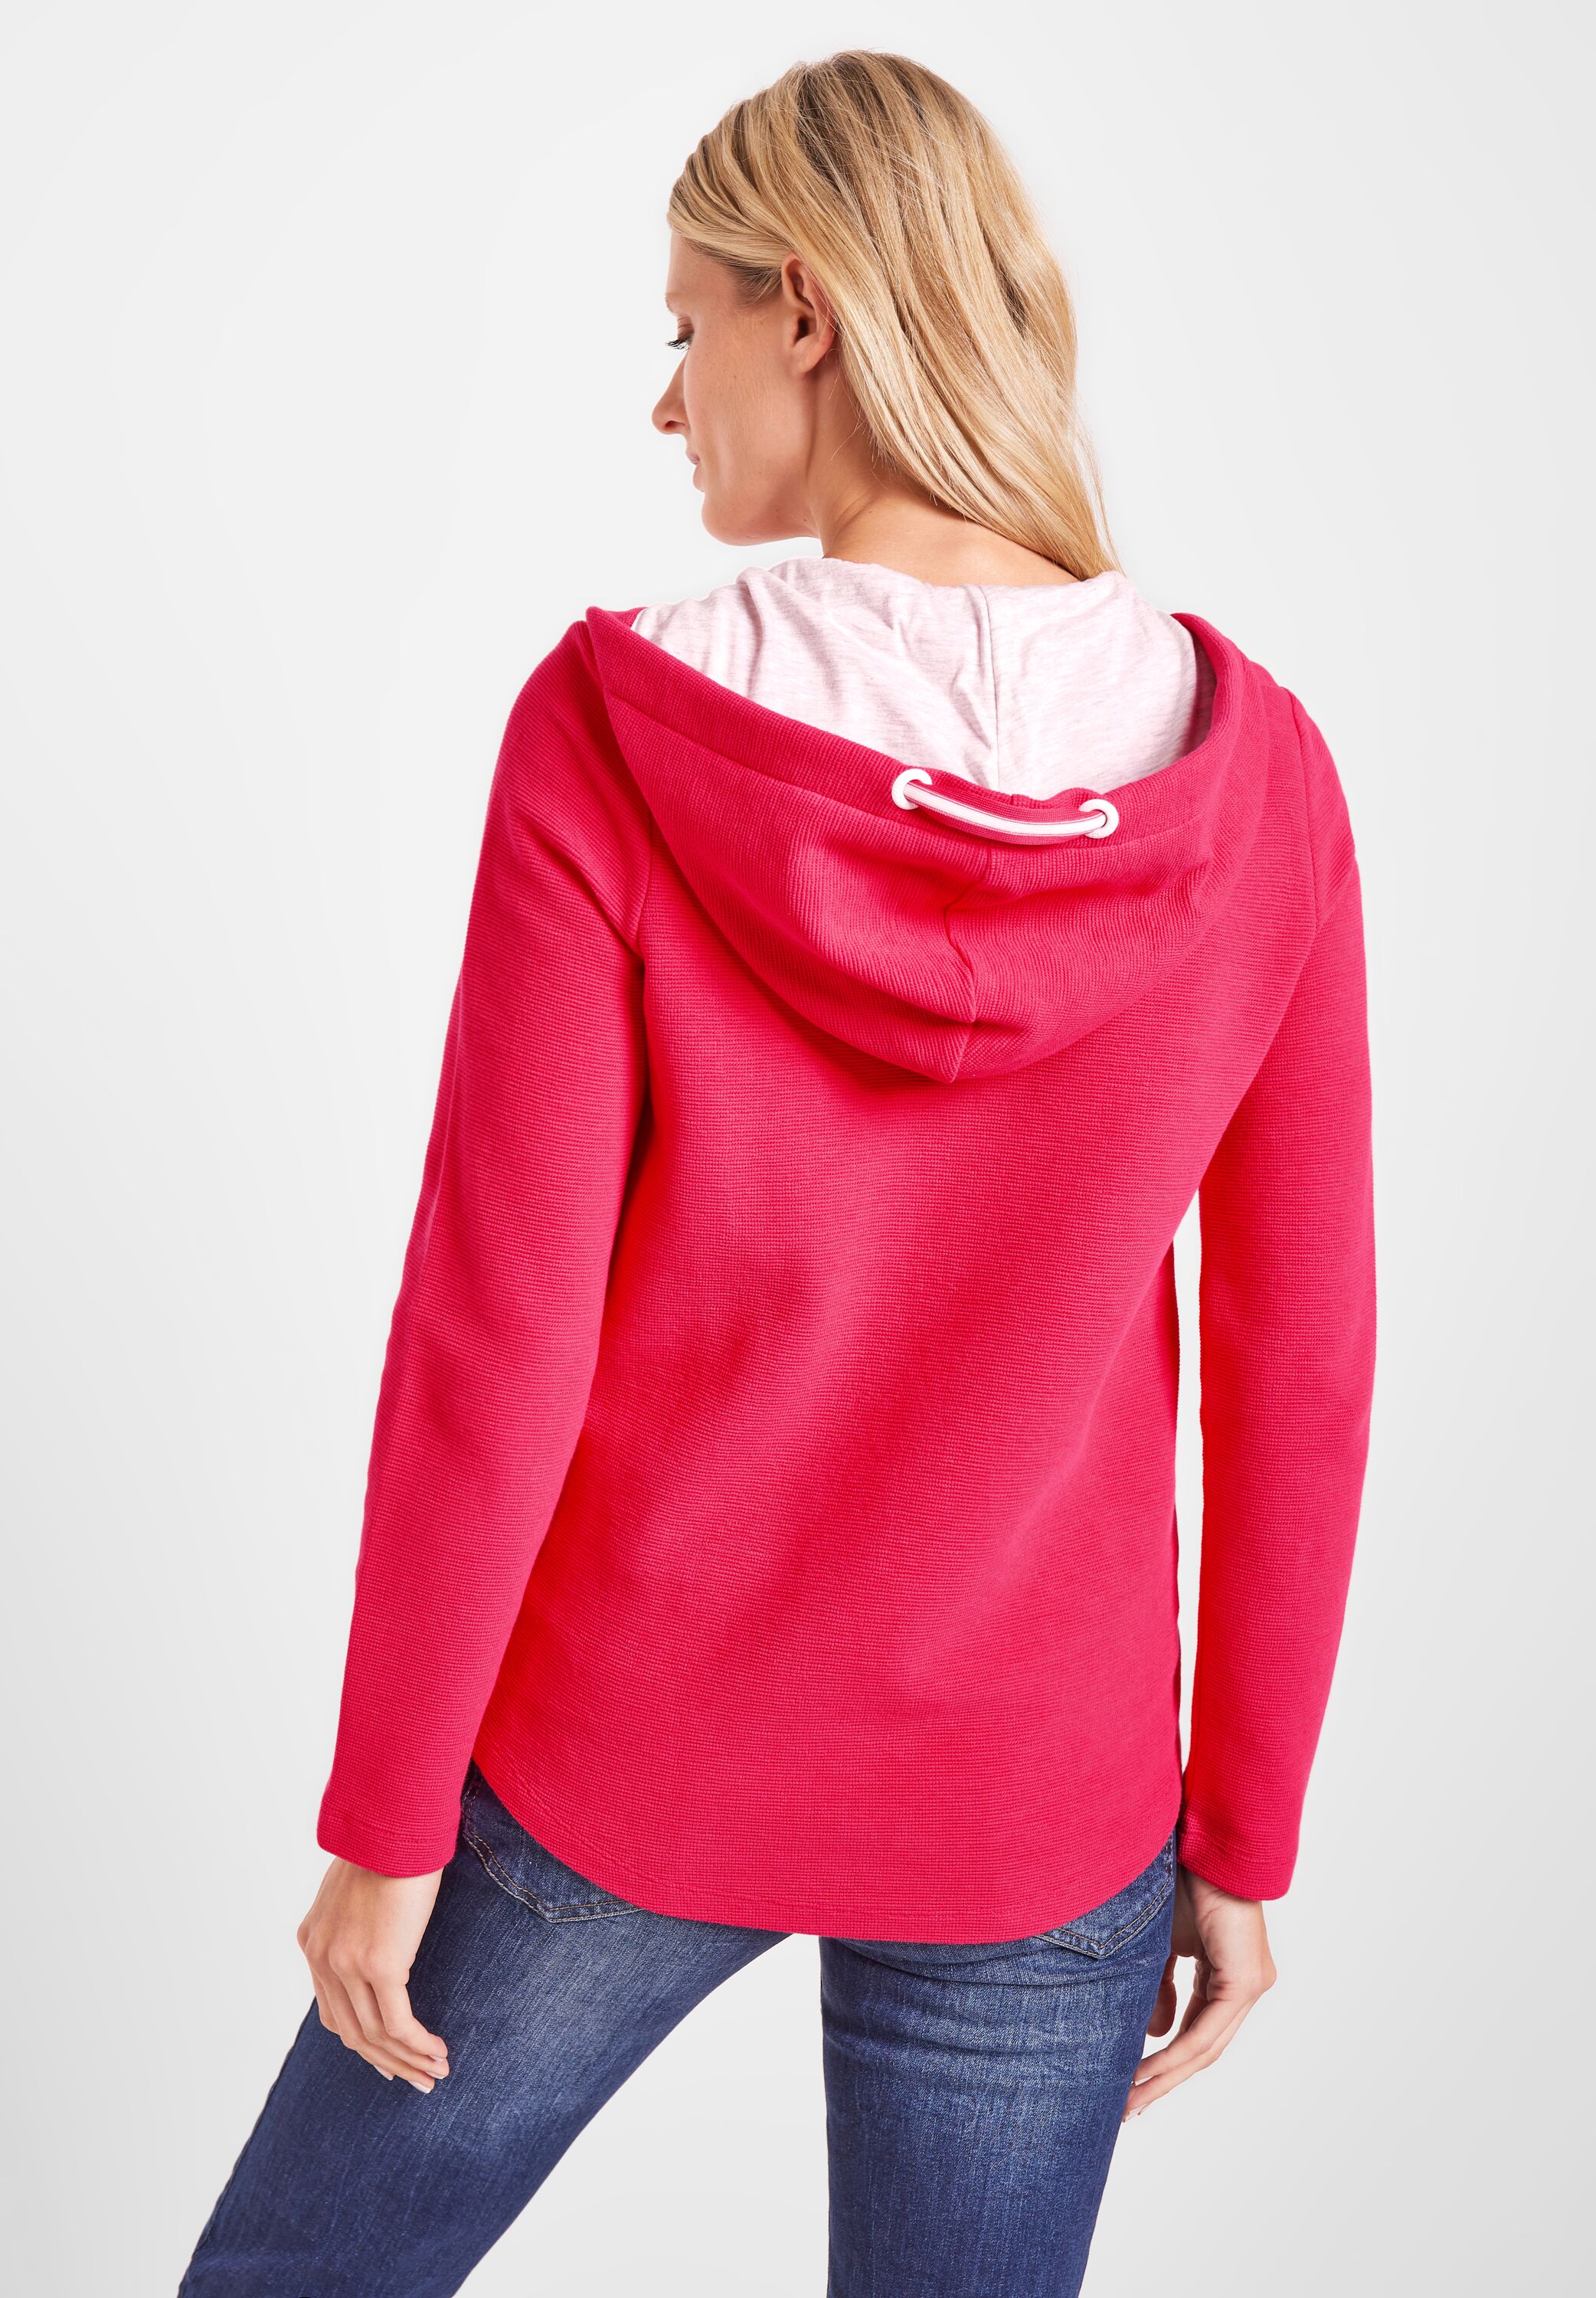 CECIL Shirtjacke in Strawberry Red reduziert SALE im - Mode CONCEPT B319398-14472